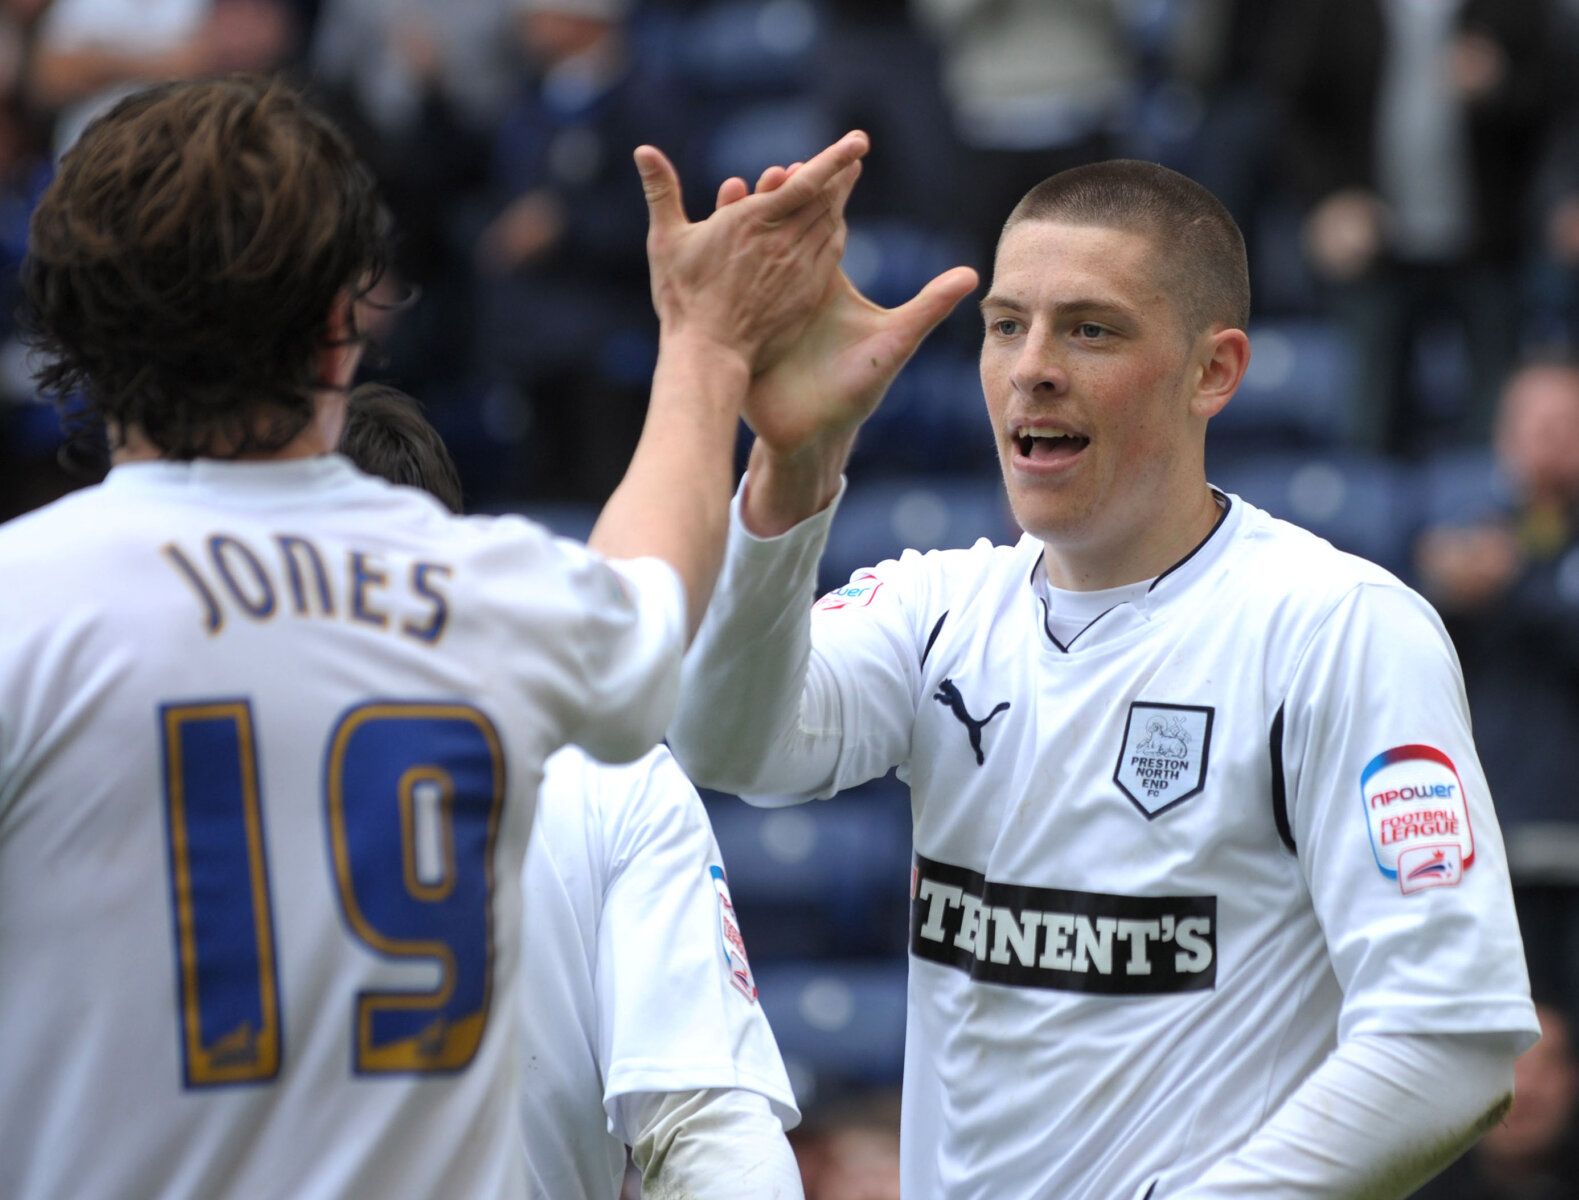 Football - Preston North End v Watford npower Football League Championship - Deepdale - 10/11 - 7/5/11 
Jamie Proctor celebrates scoring Preston's third goal with Billy Jones (L)  
Mandatory Credit: Action Images / Paul Currie 
Livepic